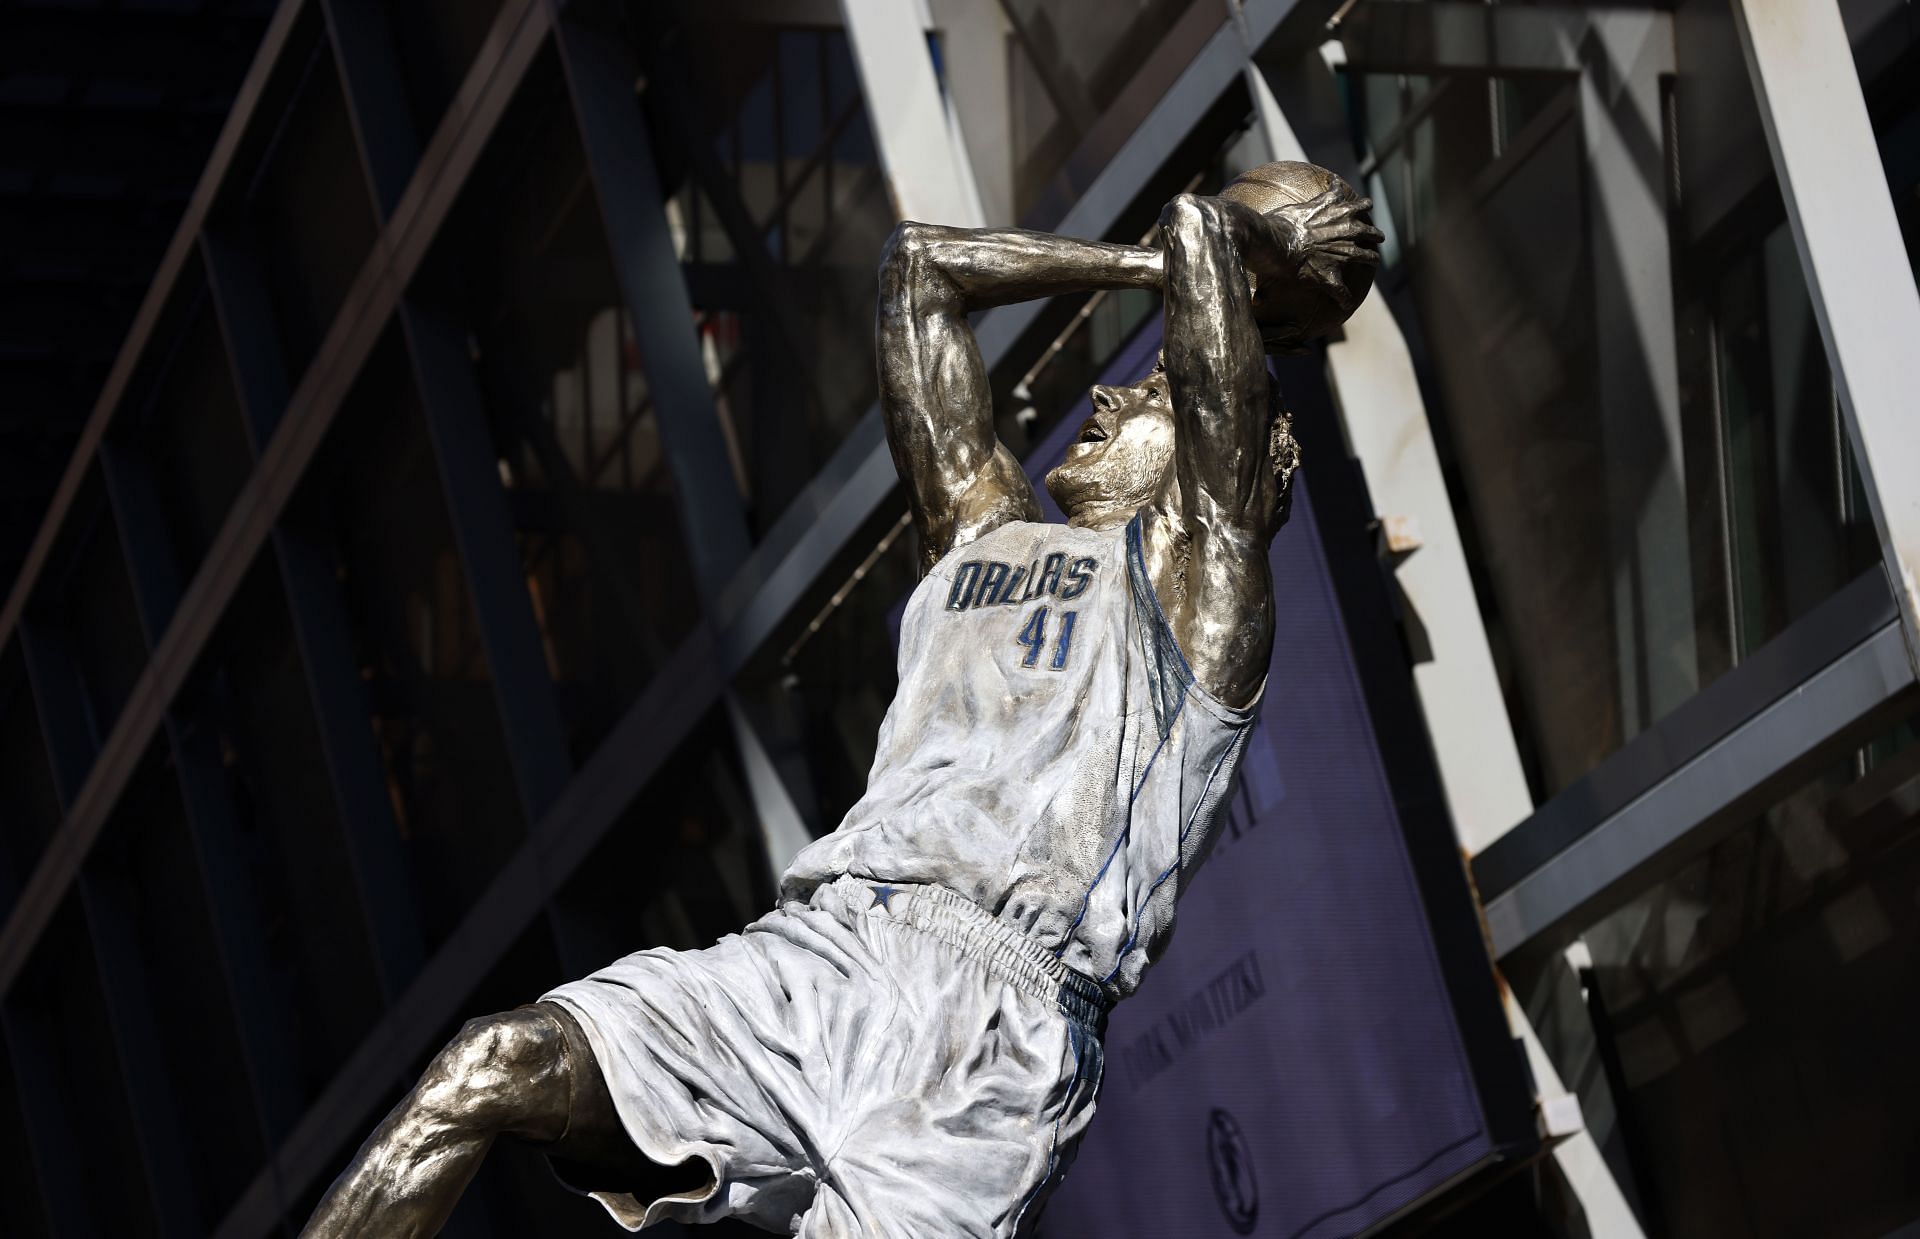 The Dallas Mavericks built a statue of Dirk Nowitzki for his legendary career with the team.